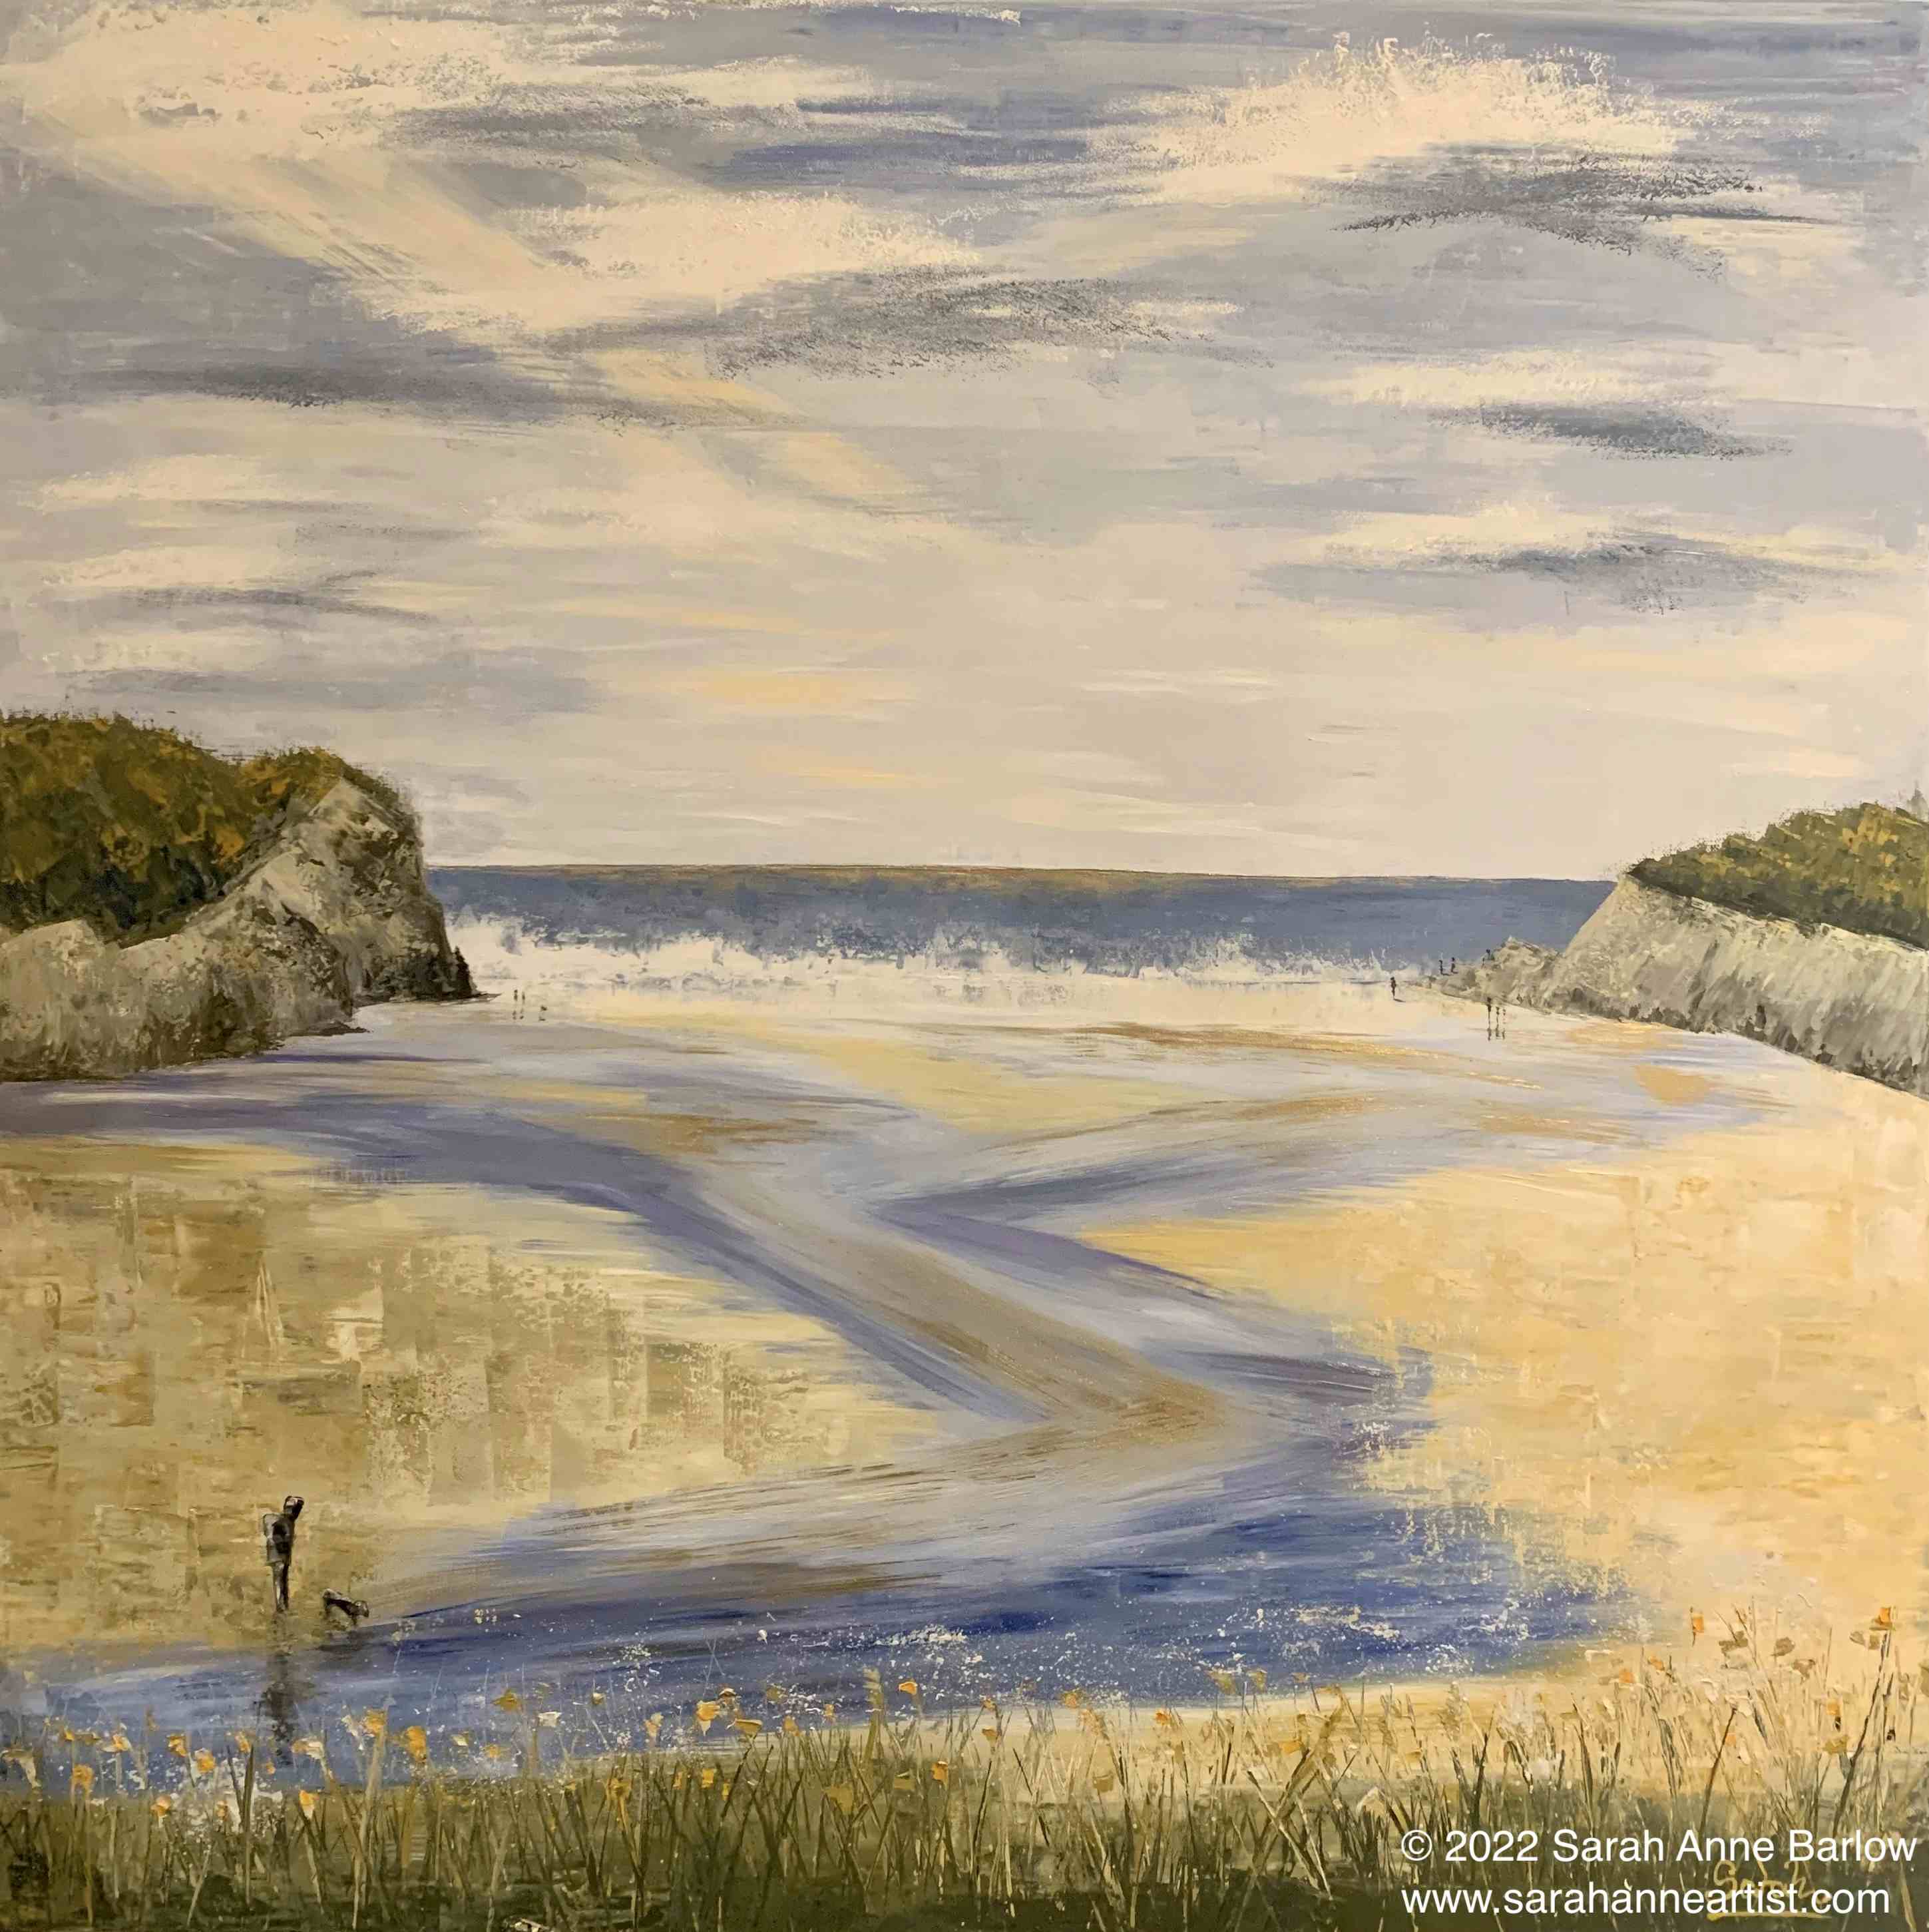 painting of The Cove at Low Tide